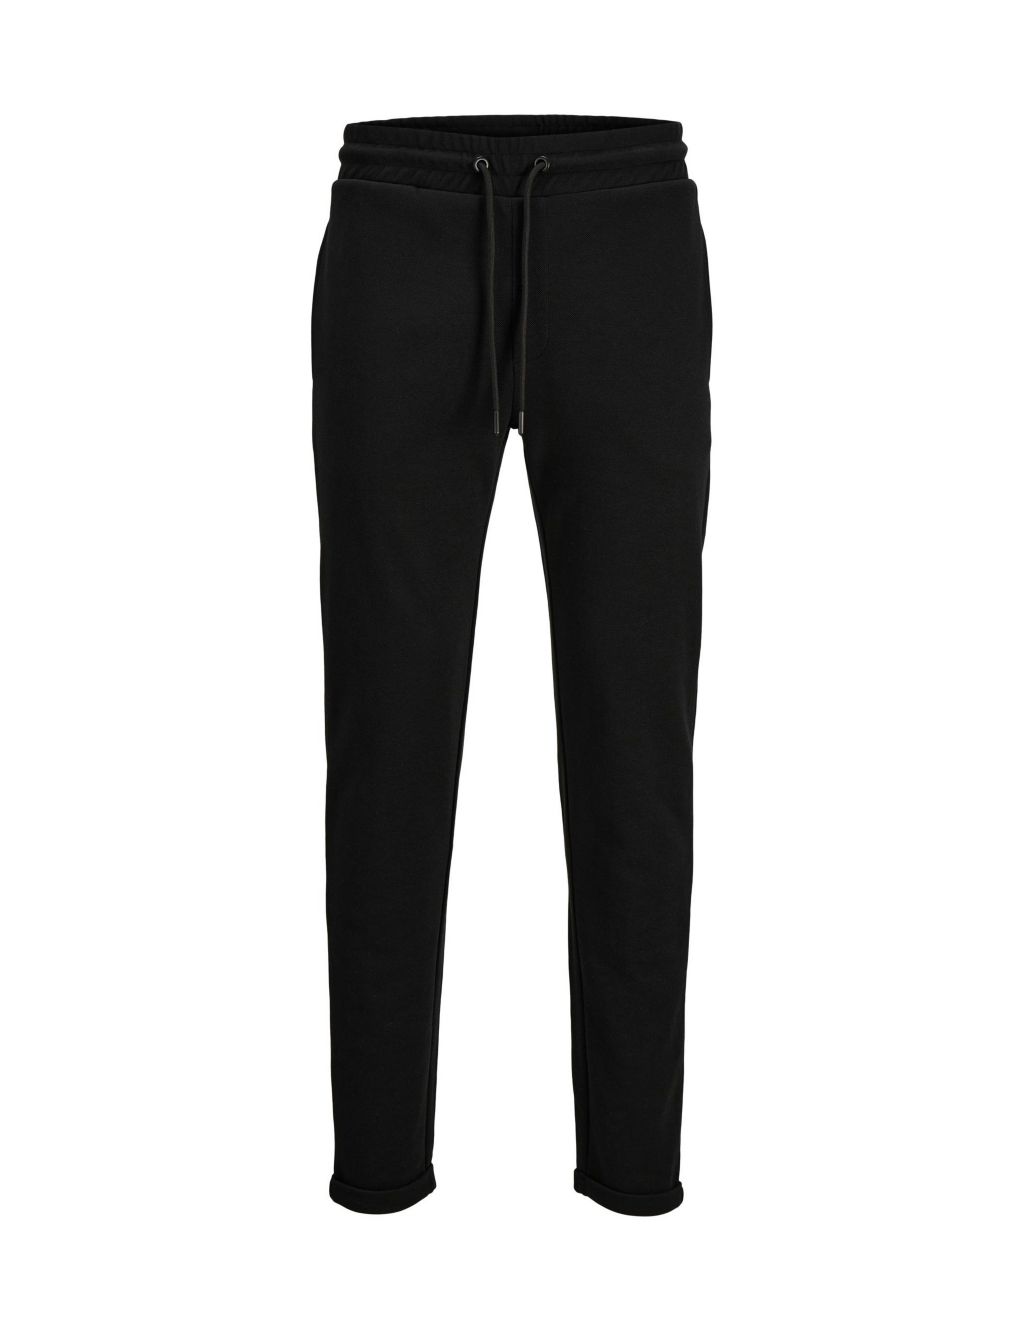 Straight Fit Elasticated Waist Trousers image 2